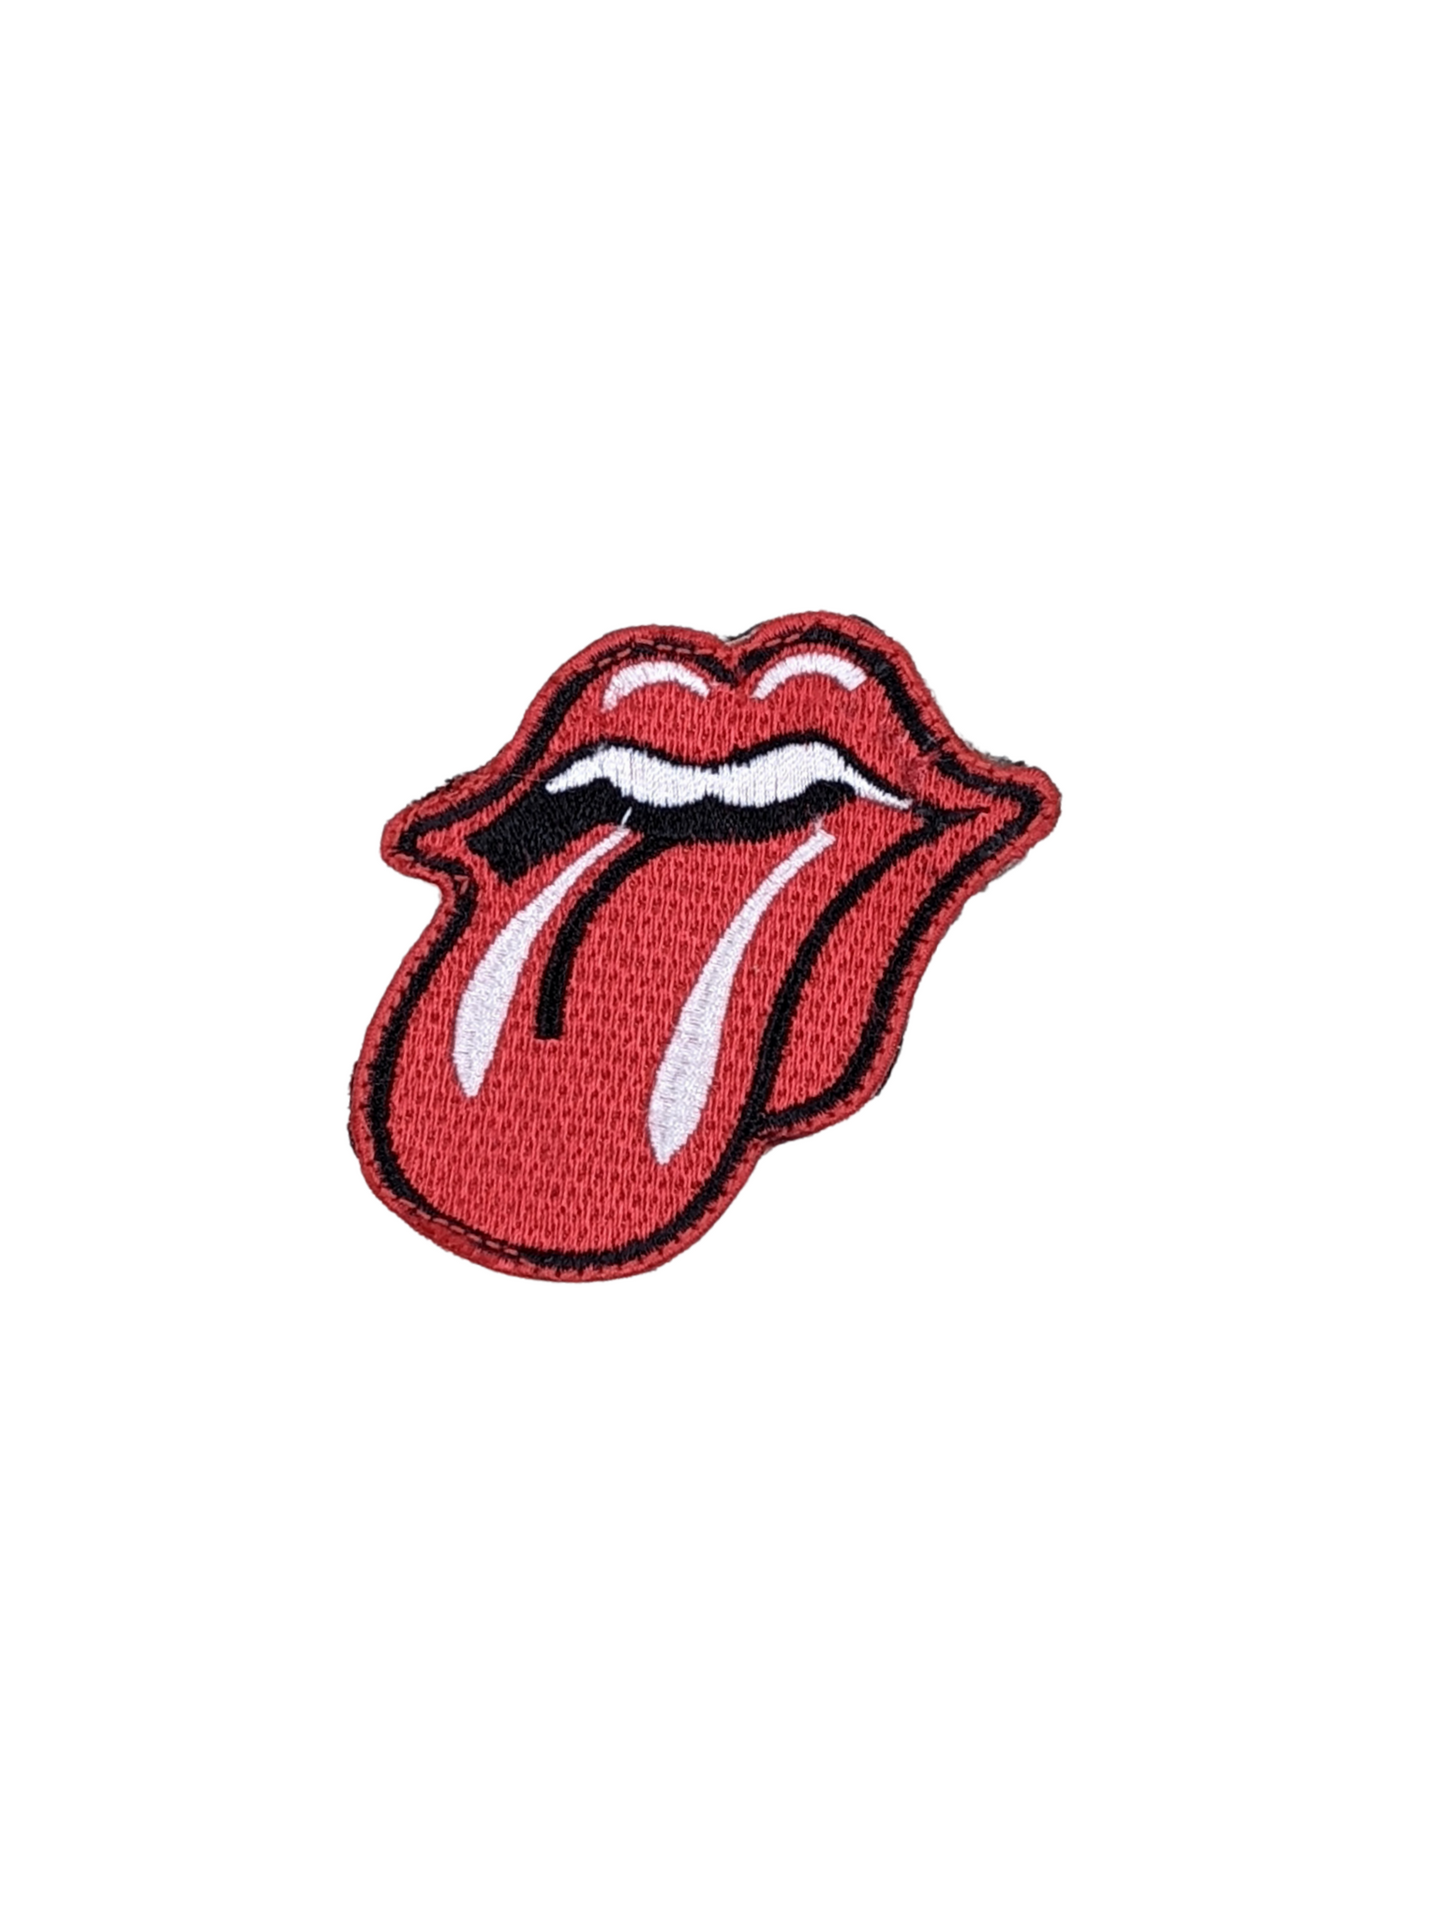 Stiky Rolling Tongue "Mouth" Patch